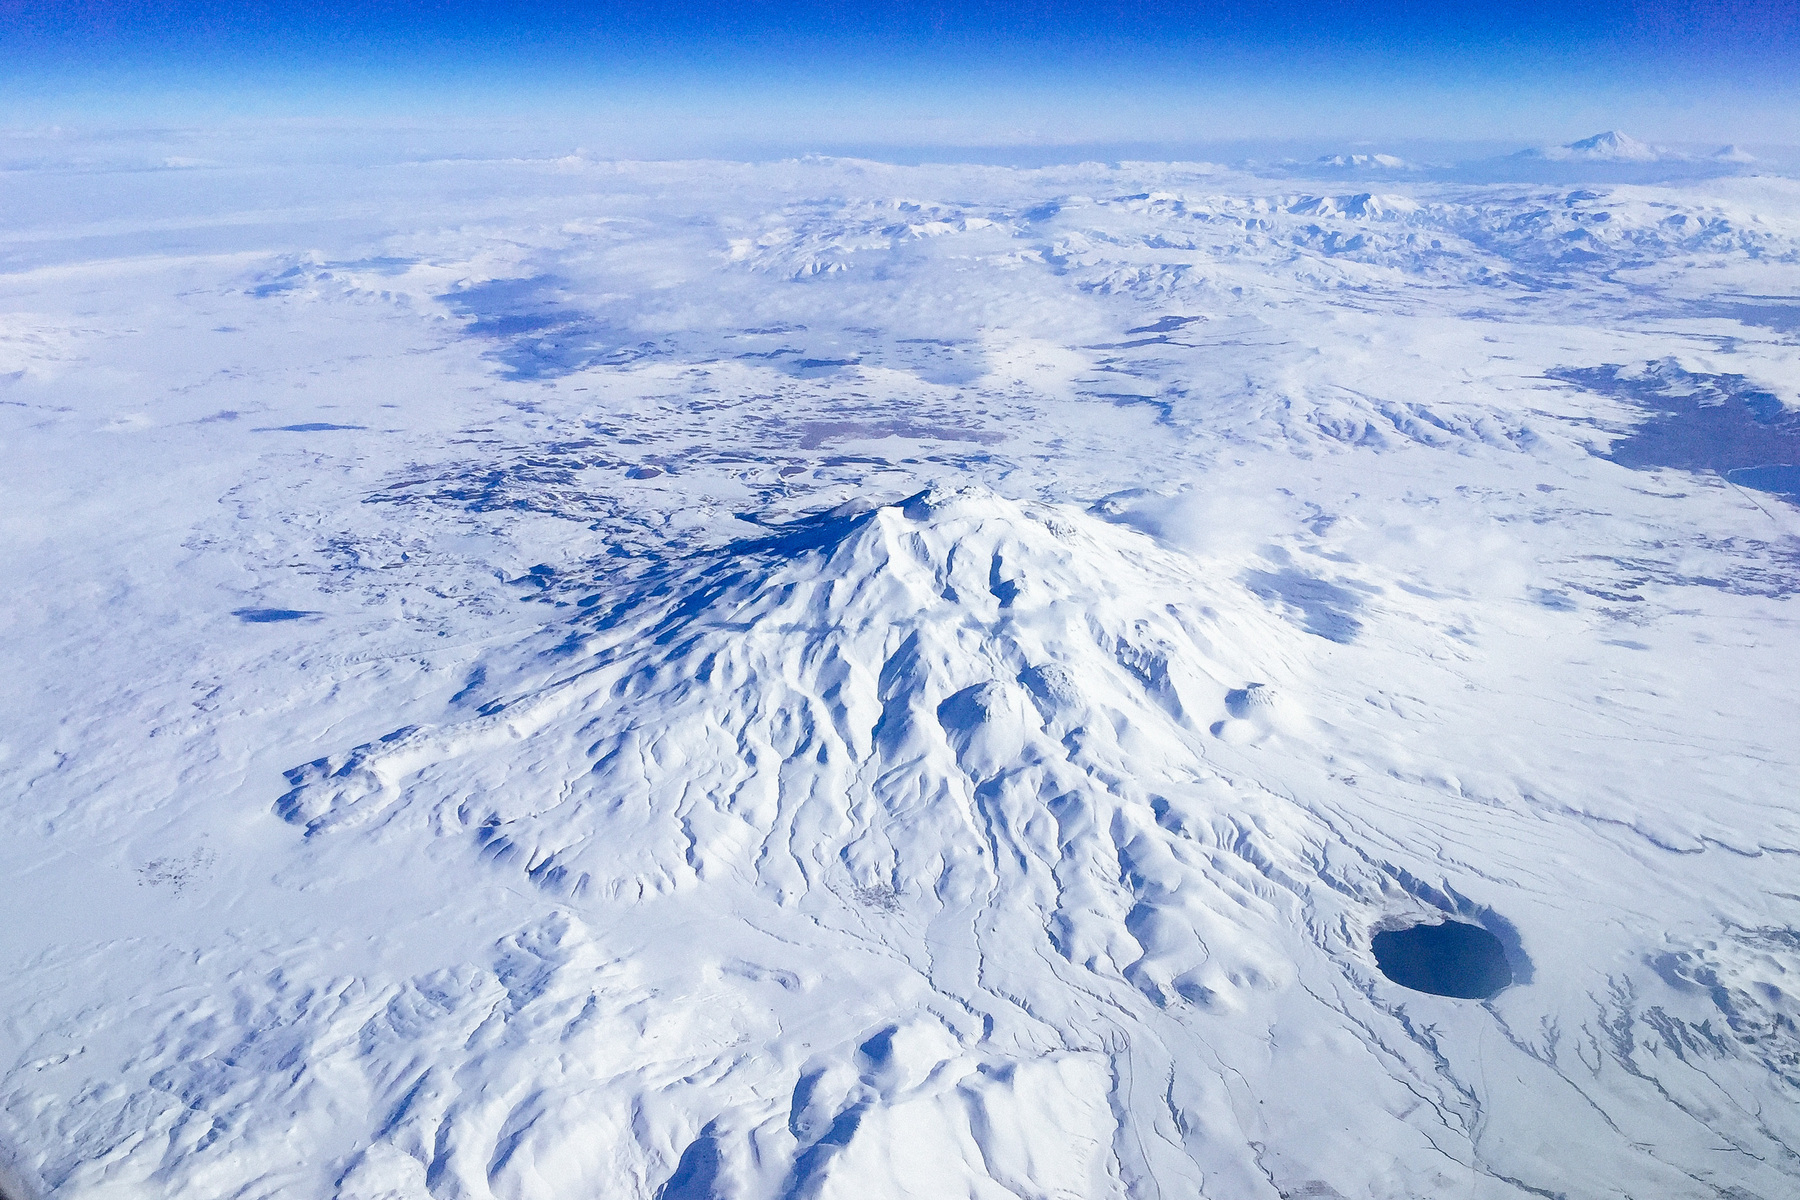 Another photo taken from an airplane, this one shows snow covered landscape, with some mountains.